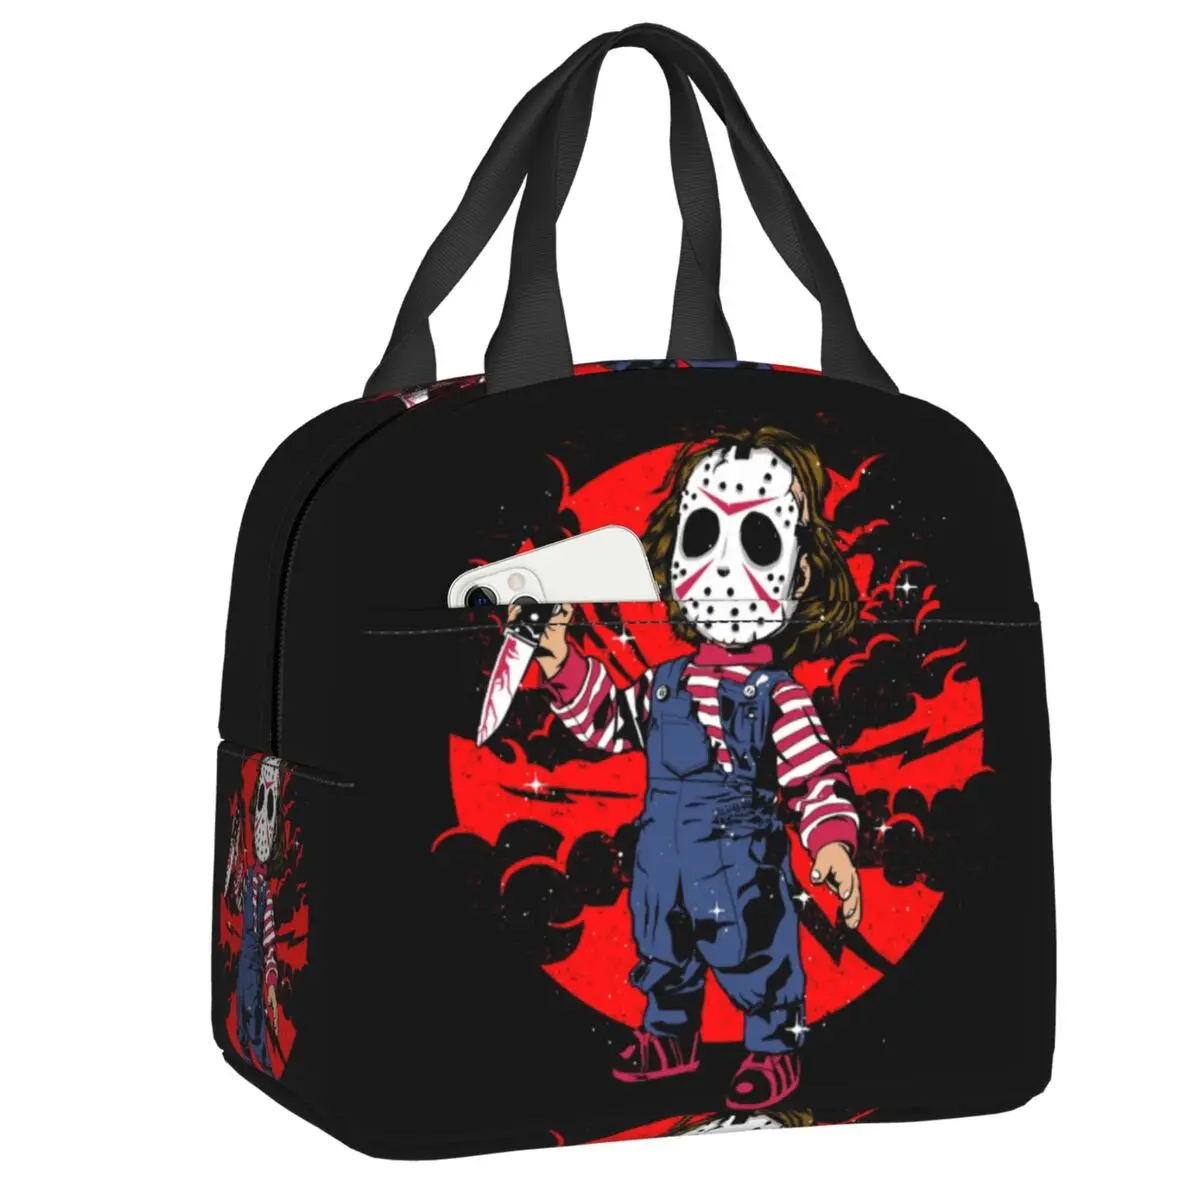 

Horror Chucky Insulated Lunch Bag for Women Resuable Horror Movie Child's Play Cooler Thermal Lunch Box Beach Camping Travel